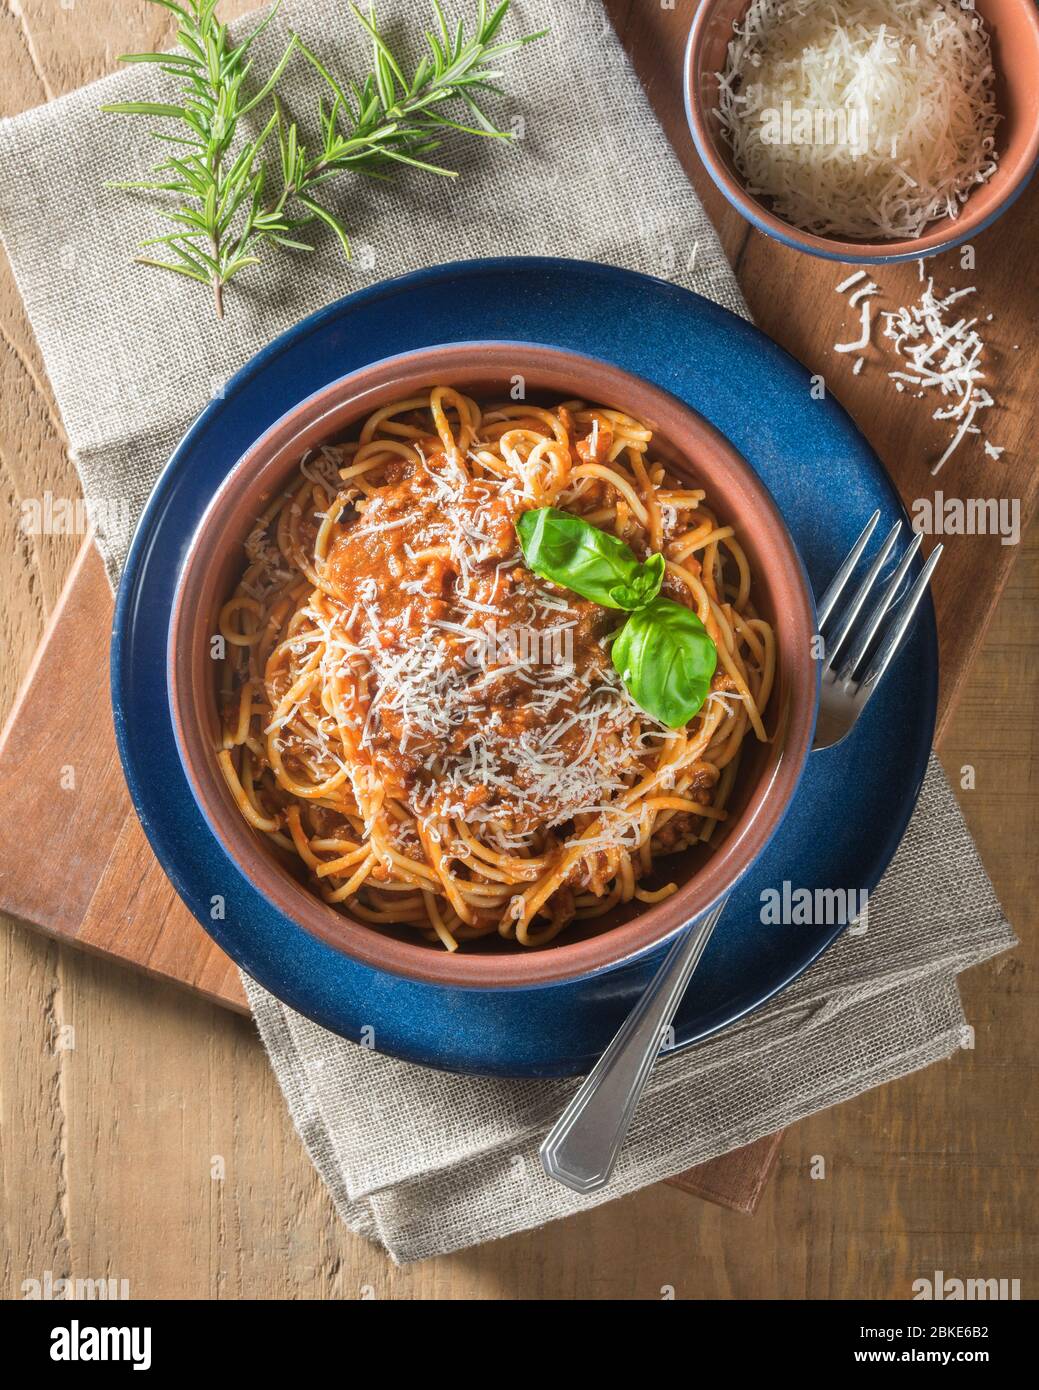 Spaghetti bolognese. Pasta in a meat and tomato sauce. Stock Photo